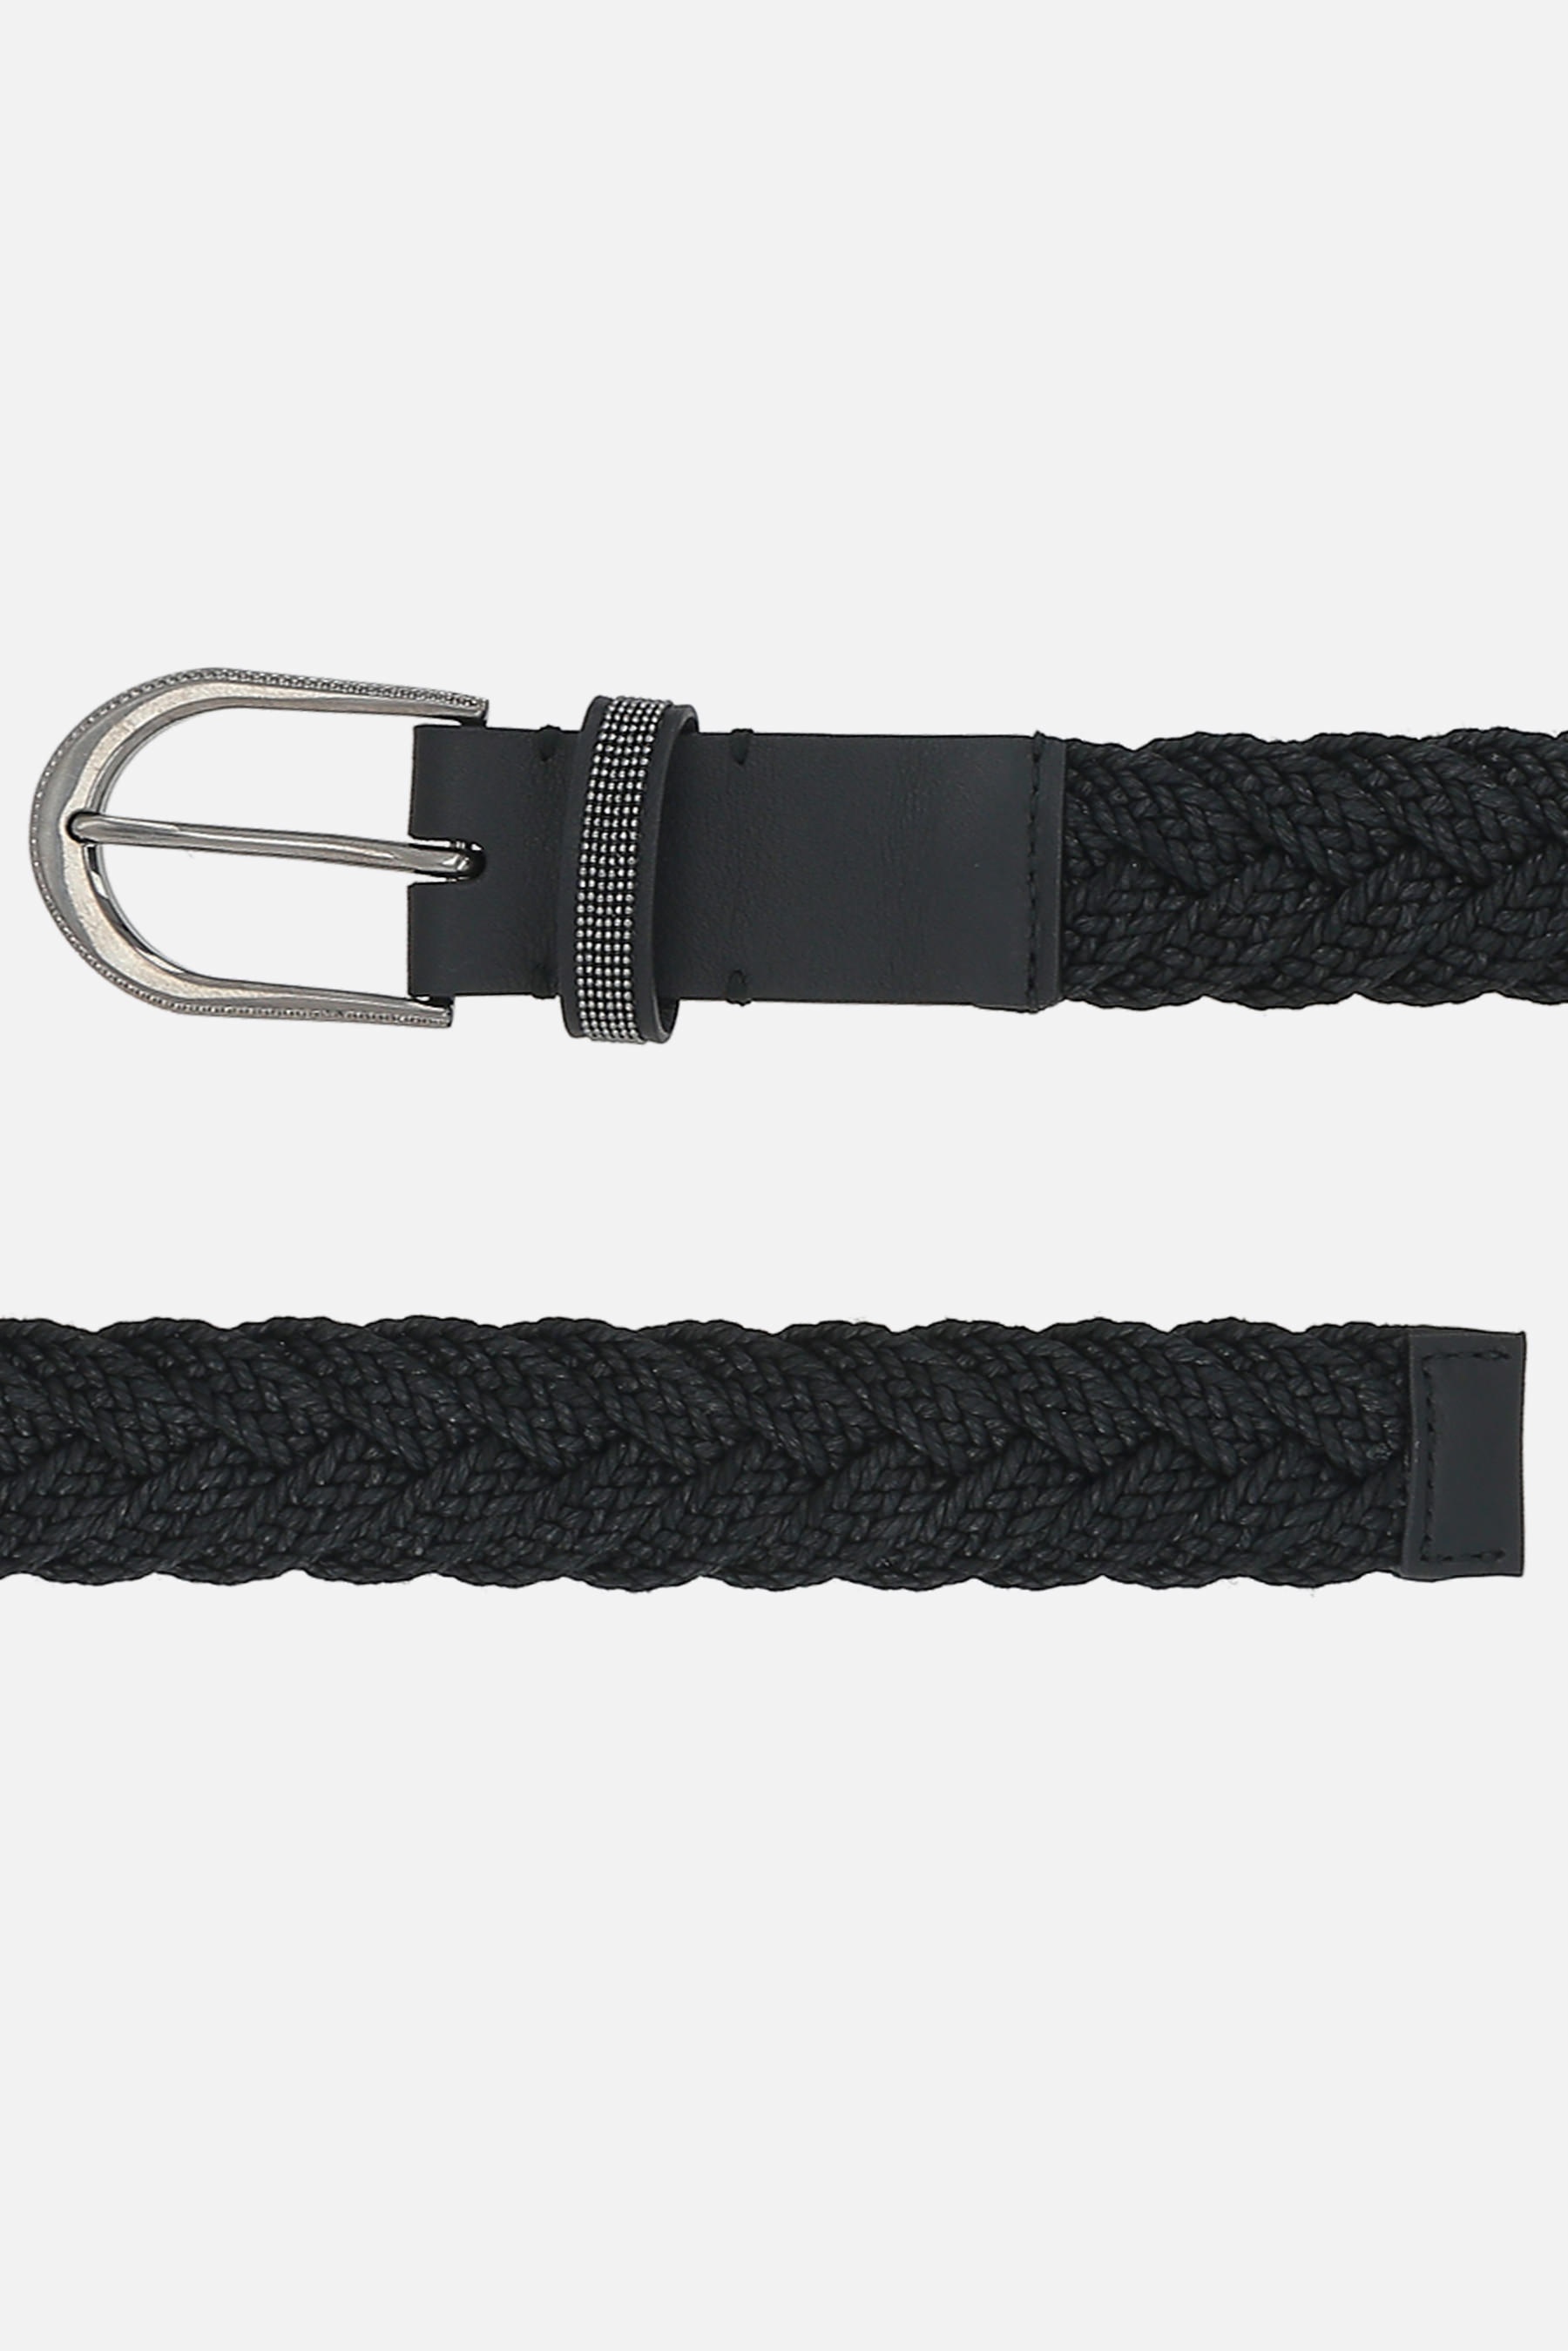 BRAIDED ROPE BELT WITH SHINY LOOP - 2